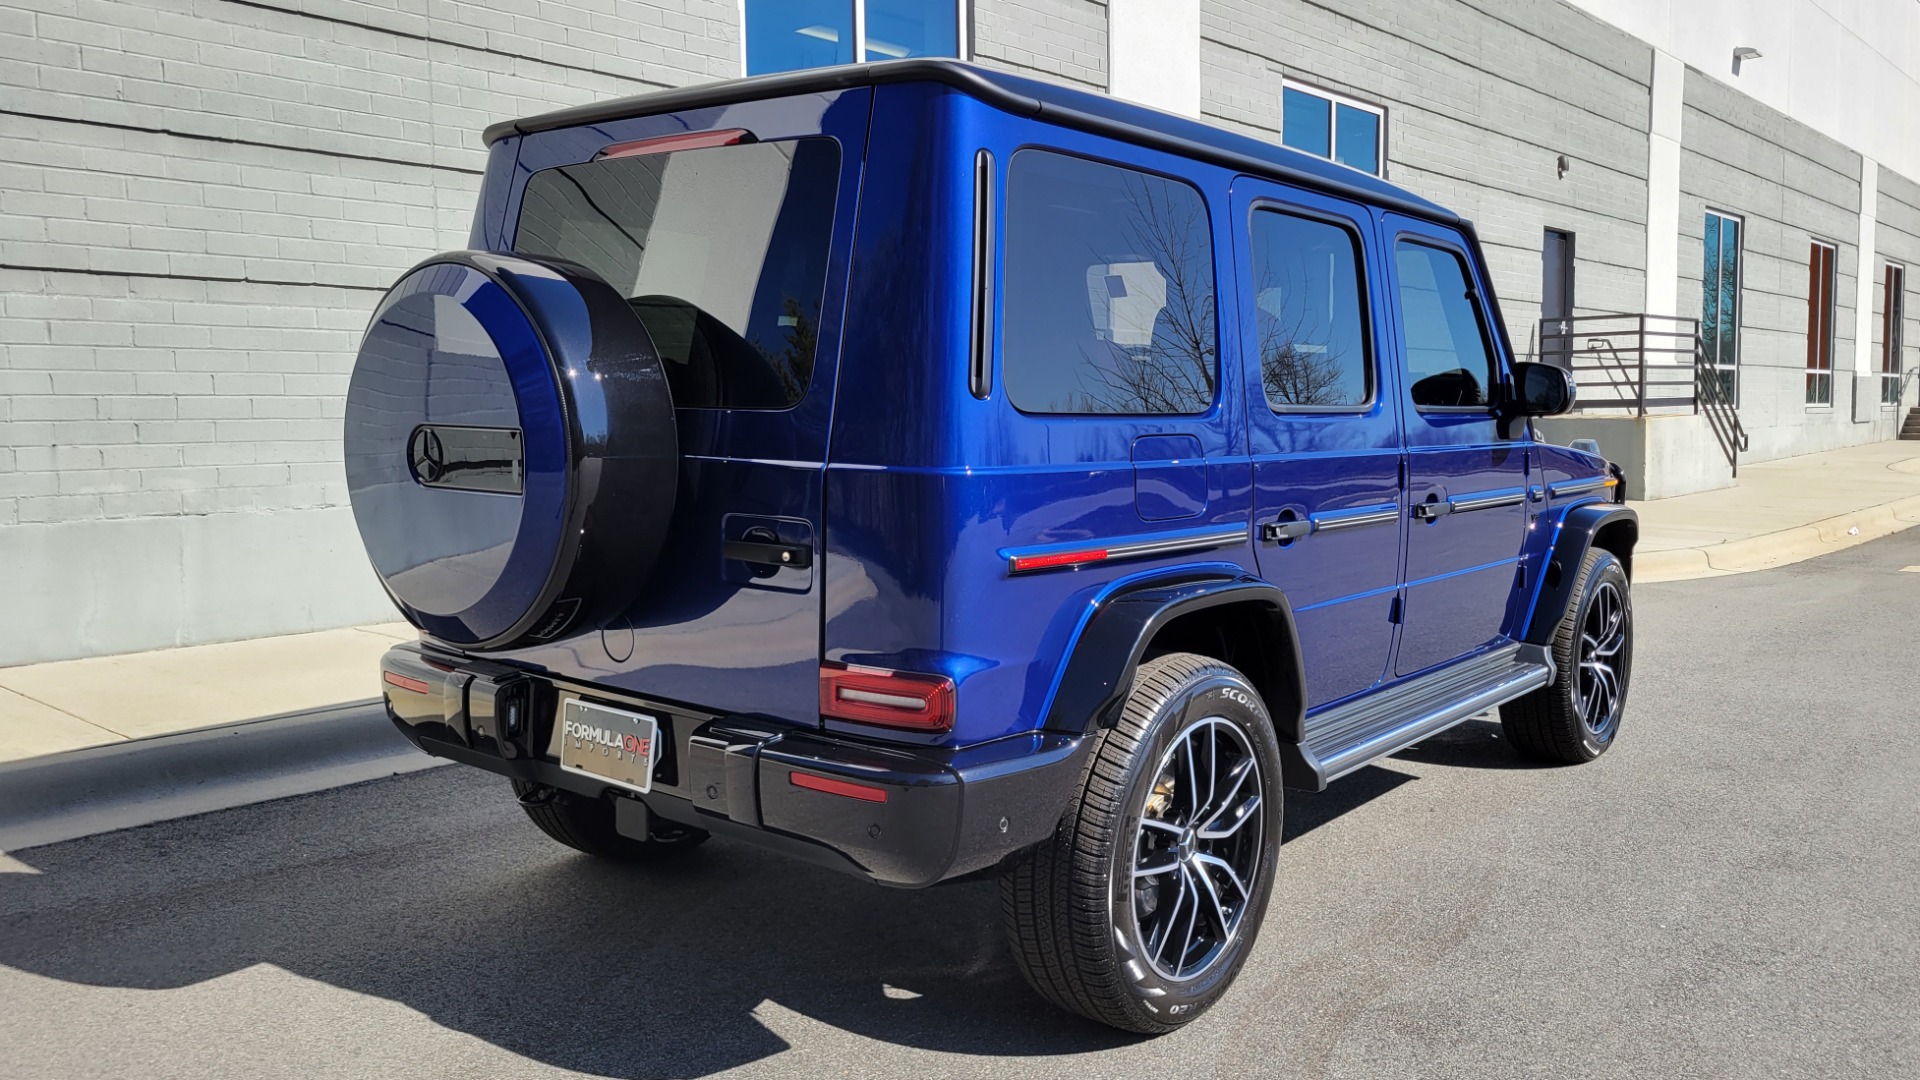 Used 2021 Mercedes-Benz G-CLASS G 550 4MATIC SUV / AMG LINE / EXCLUSIVE INTR / NIGHT PKG PLUS for sale $198,999 at Formula Imports in Charlotte NC 28227 2